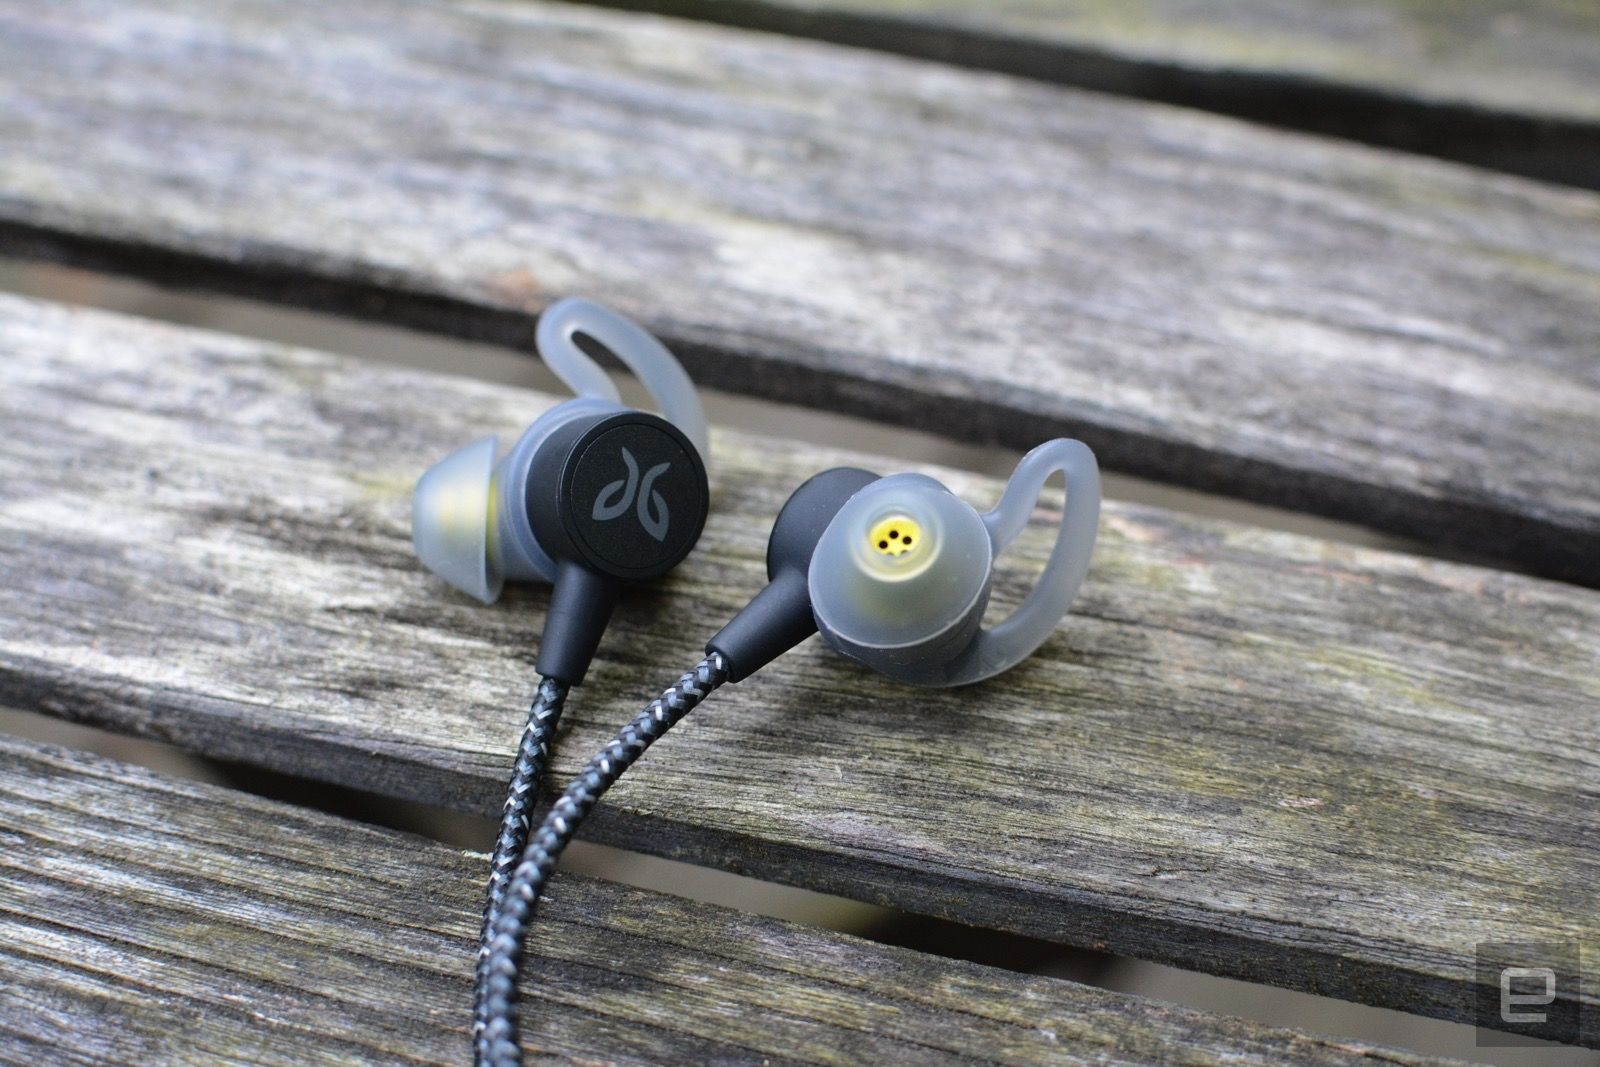 Jaybird's Tarah Pro wireless earbuds offer 14 hours of music for $160 | DeviceDaily.com